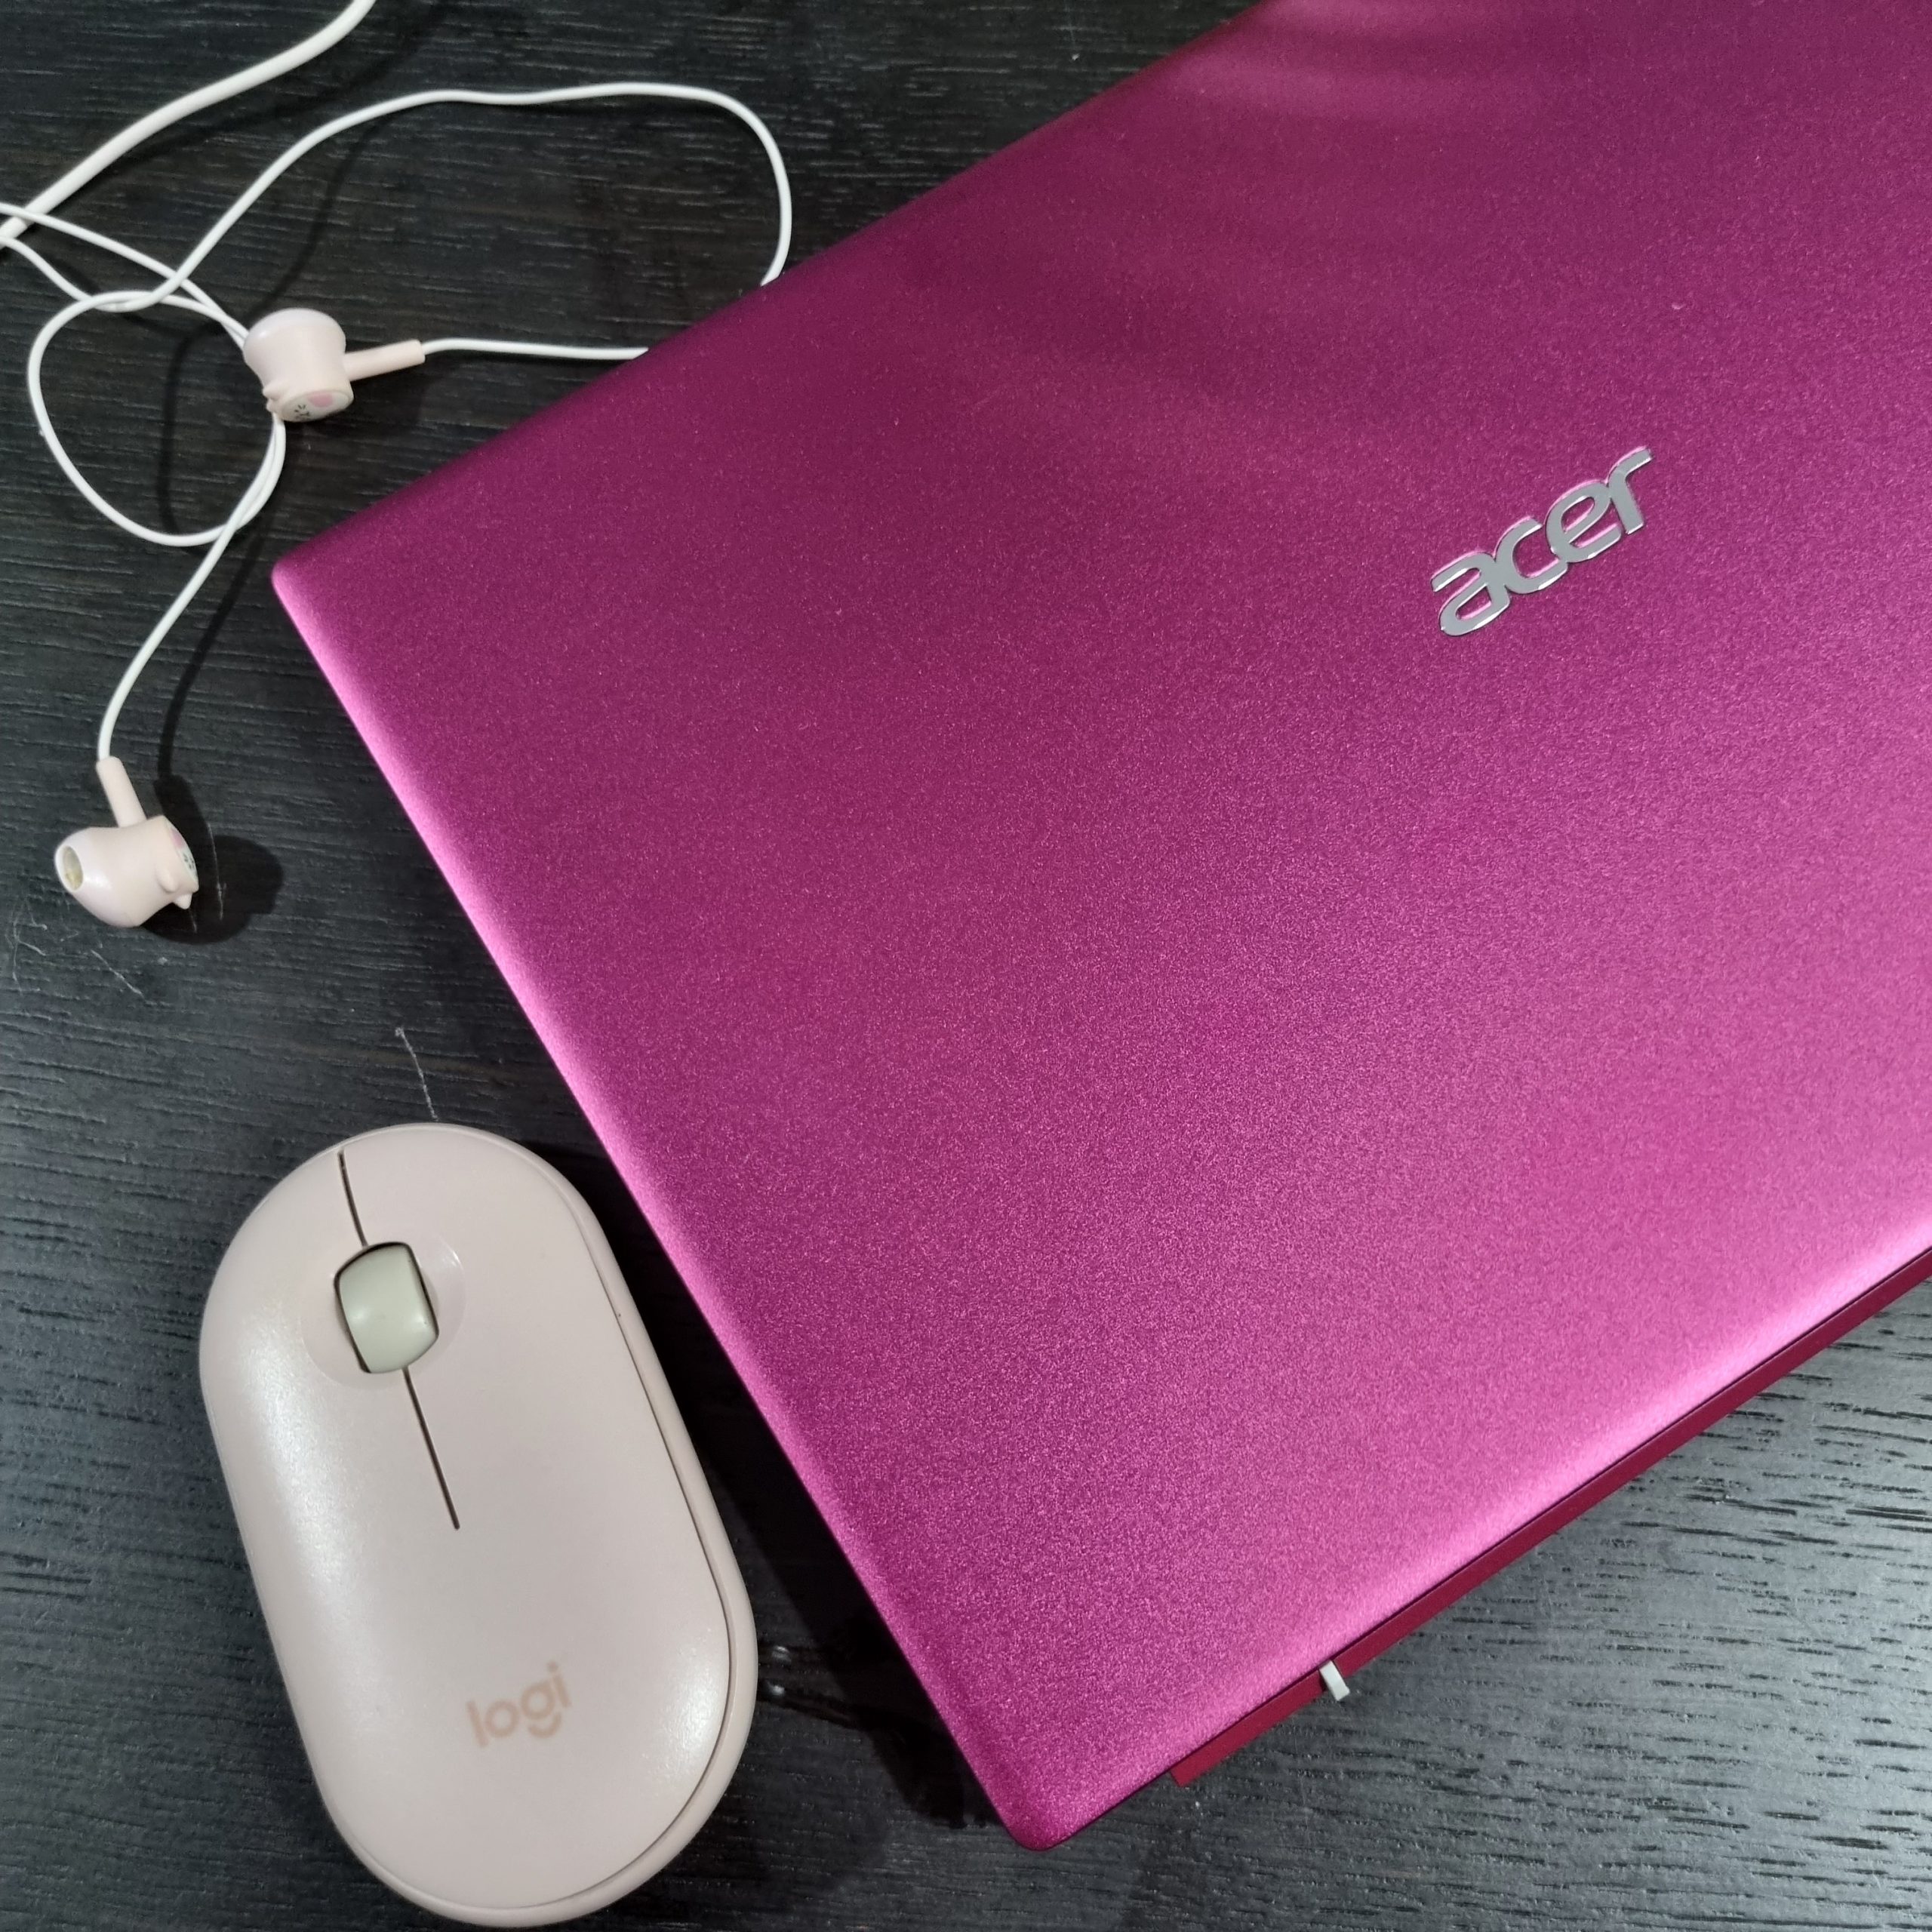 Laptop Pink Acer Swift 3 In The House!